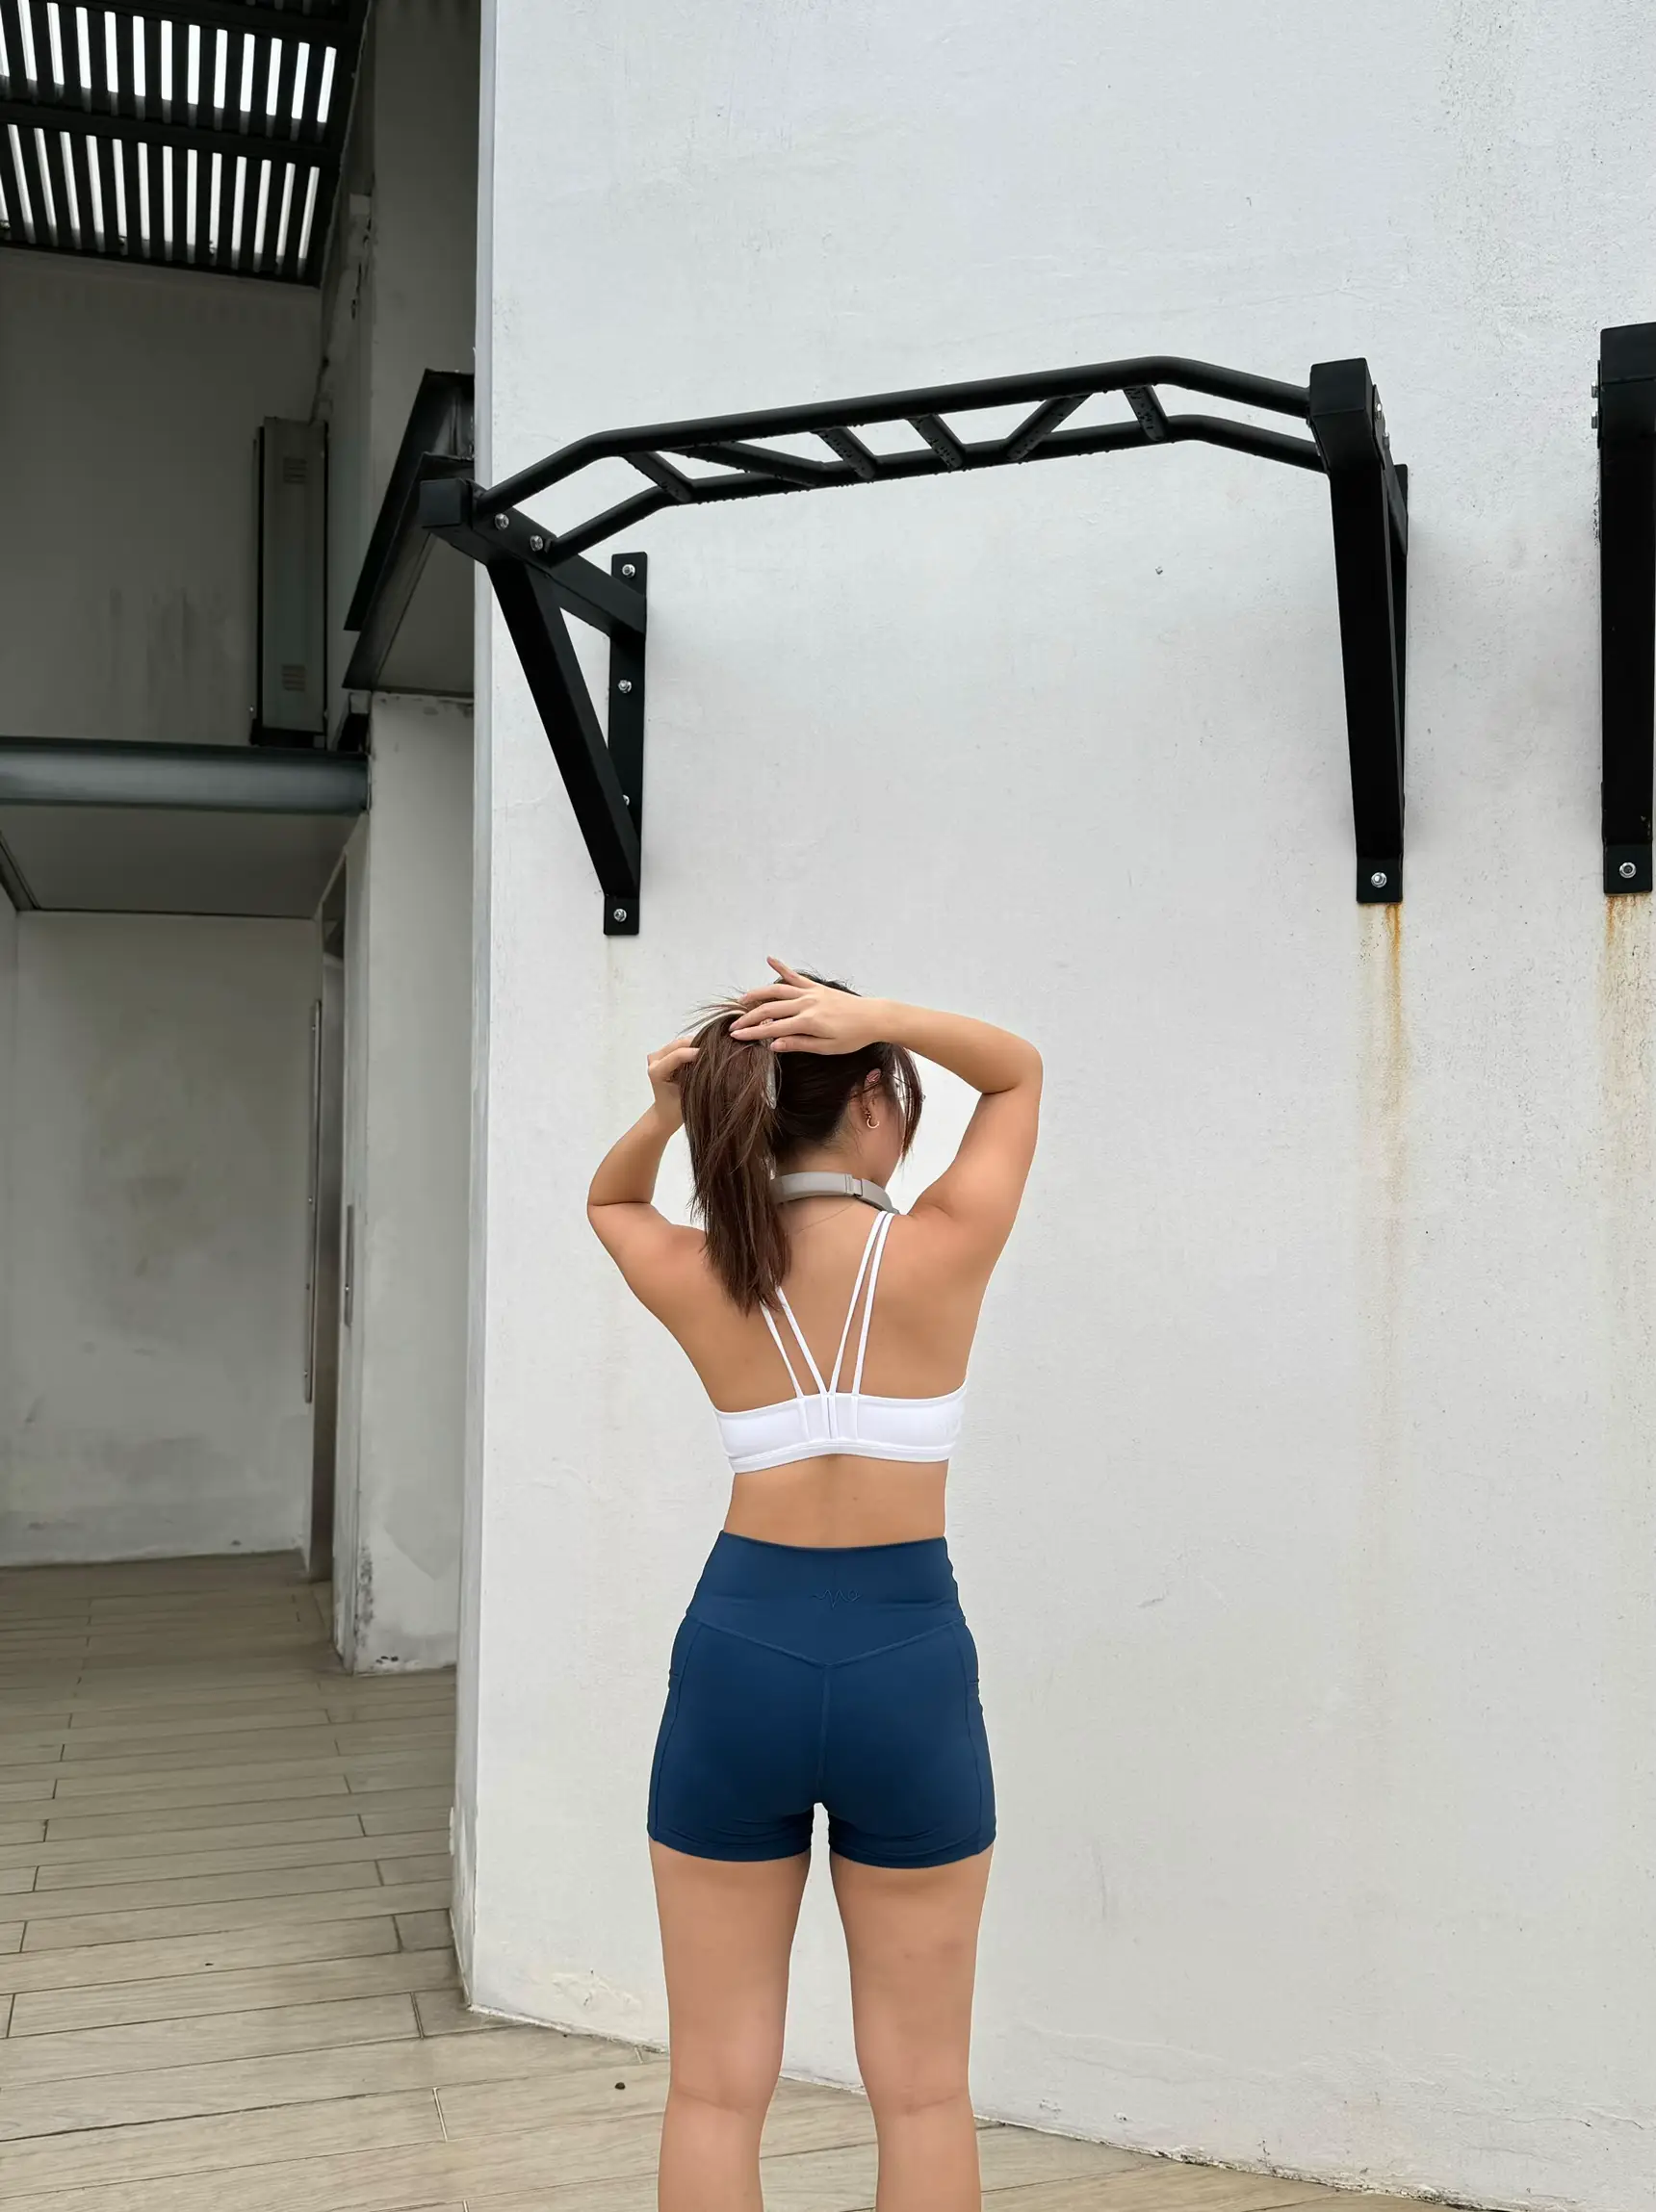 THE BEST SPORTS BRA FOR SMALL CHESTED GIRLS 🏃🏻, Gallery posted by  Natasha Lee